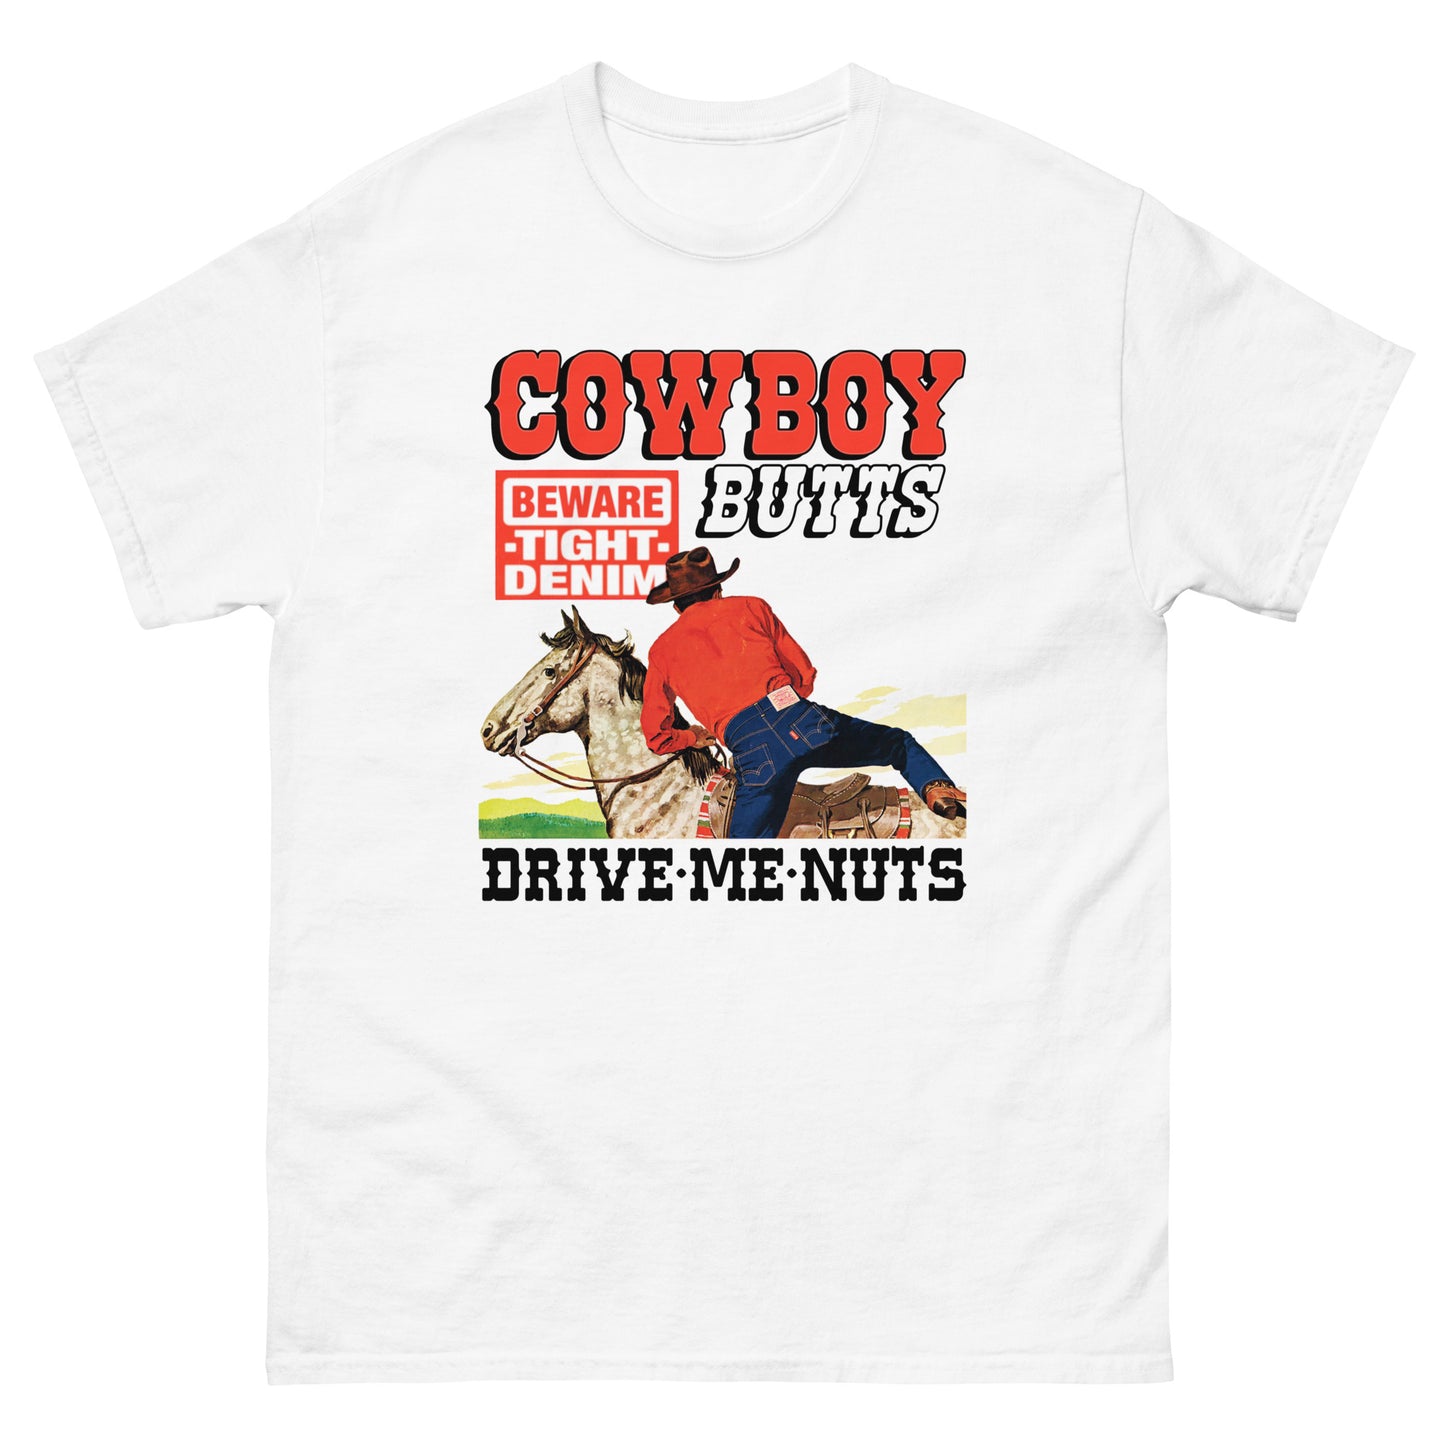 Cowboy Butts Drive Me Nuts.